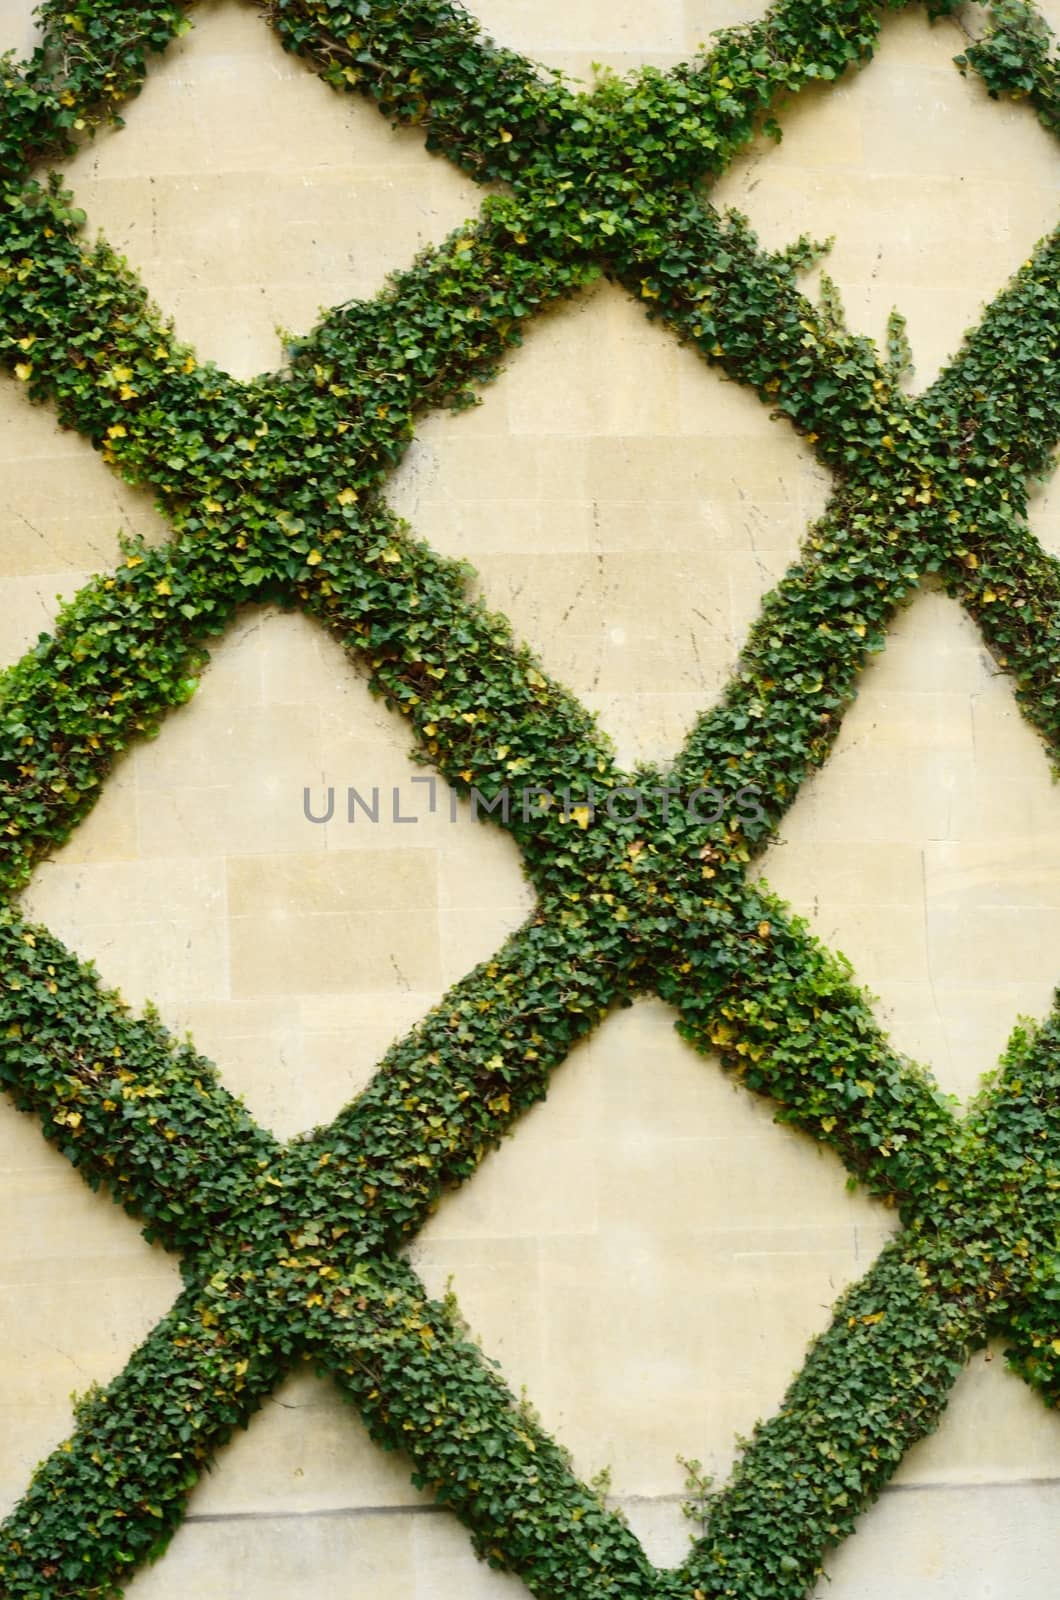 Decorative Ivy on Wall